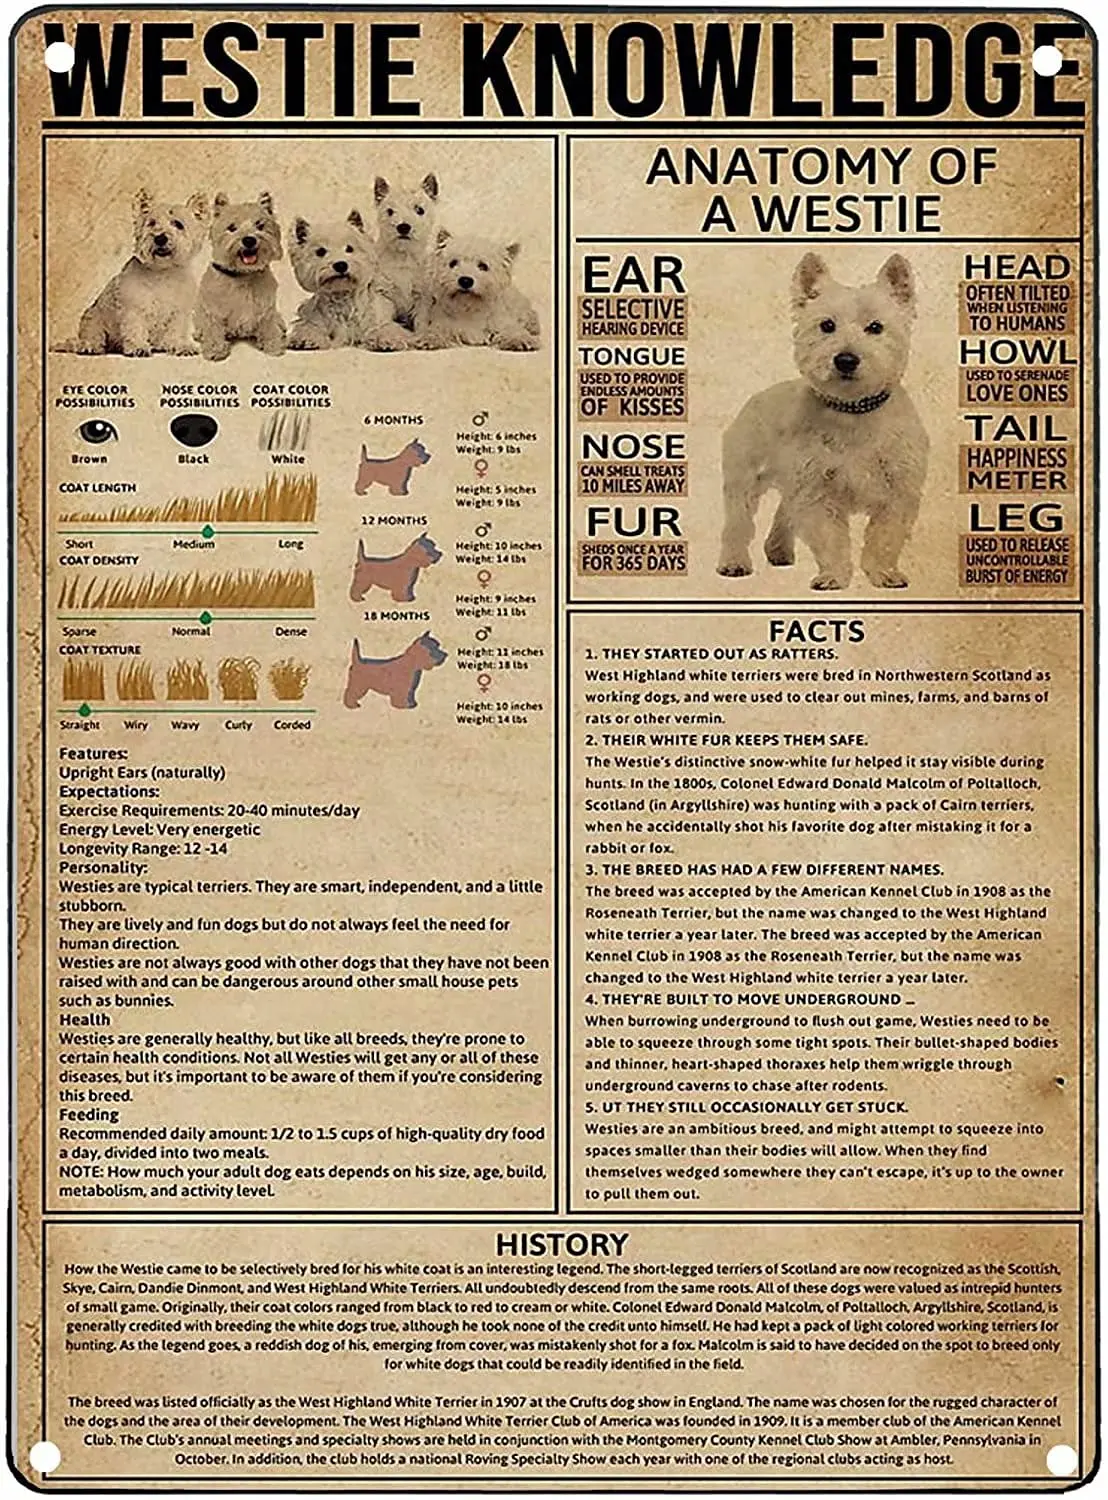 

Westie Knowledge Art Wall Decor Metal Tin Signs Anatomy Of A Westie Printed Poster Entertainment Bar Cafe Living Room Kitchen Ga